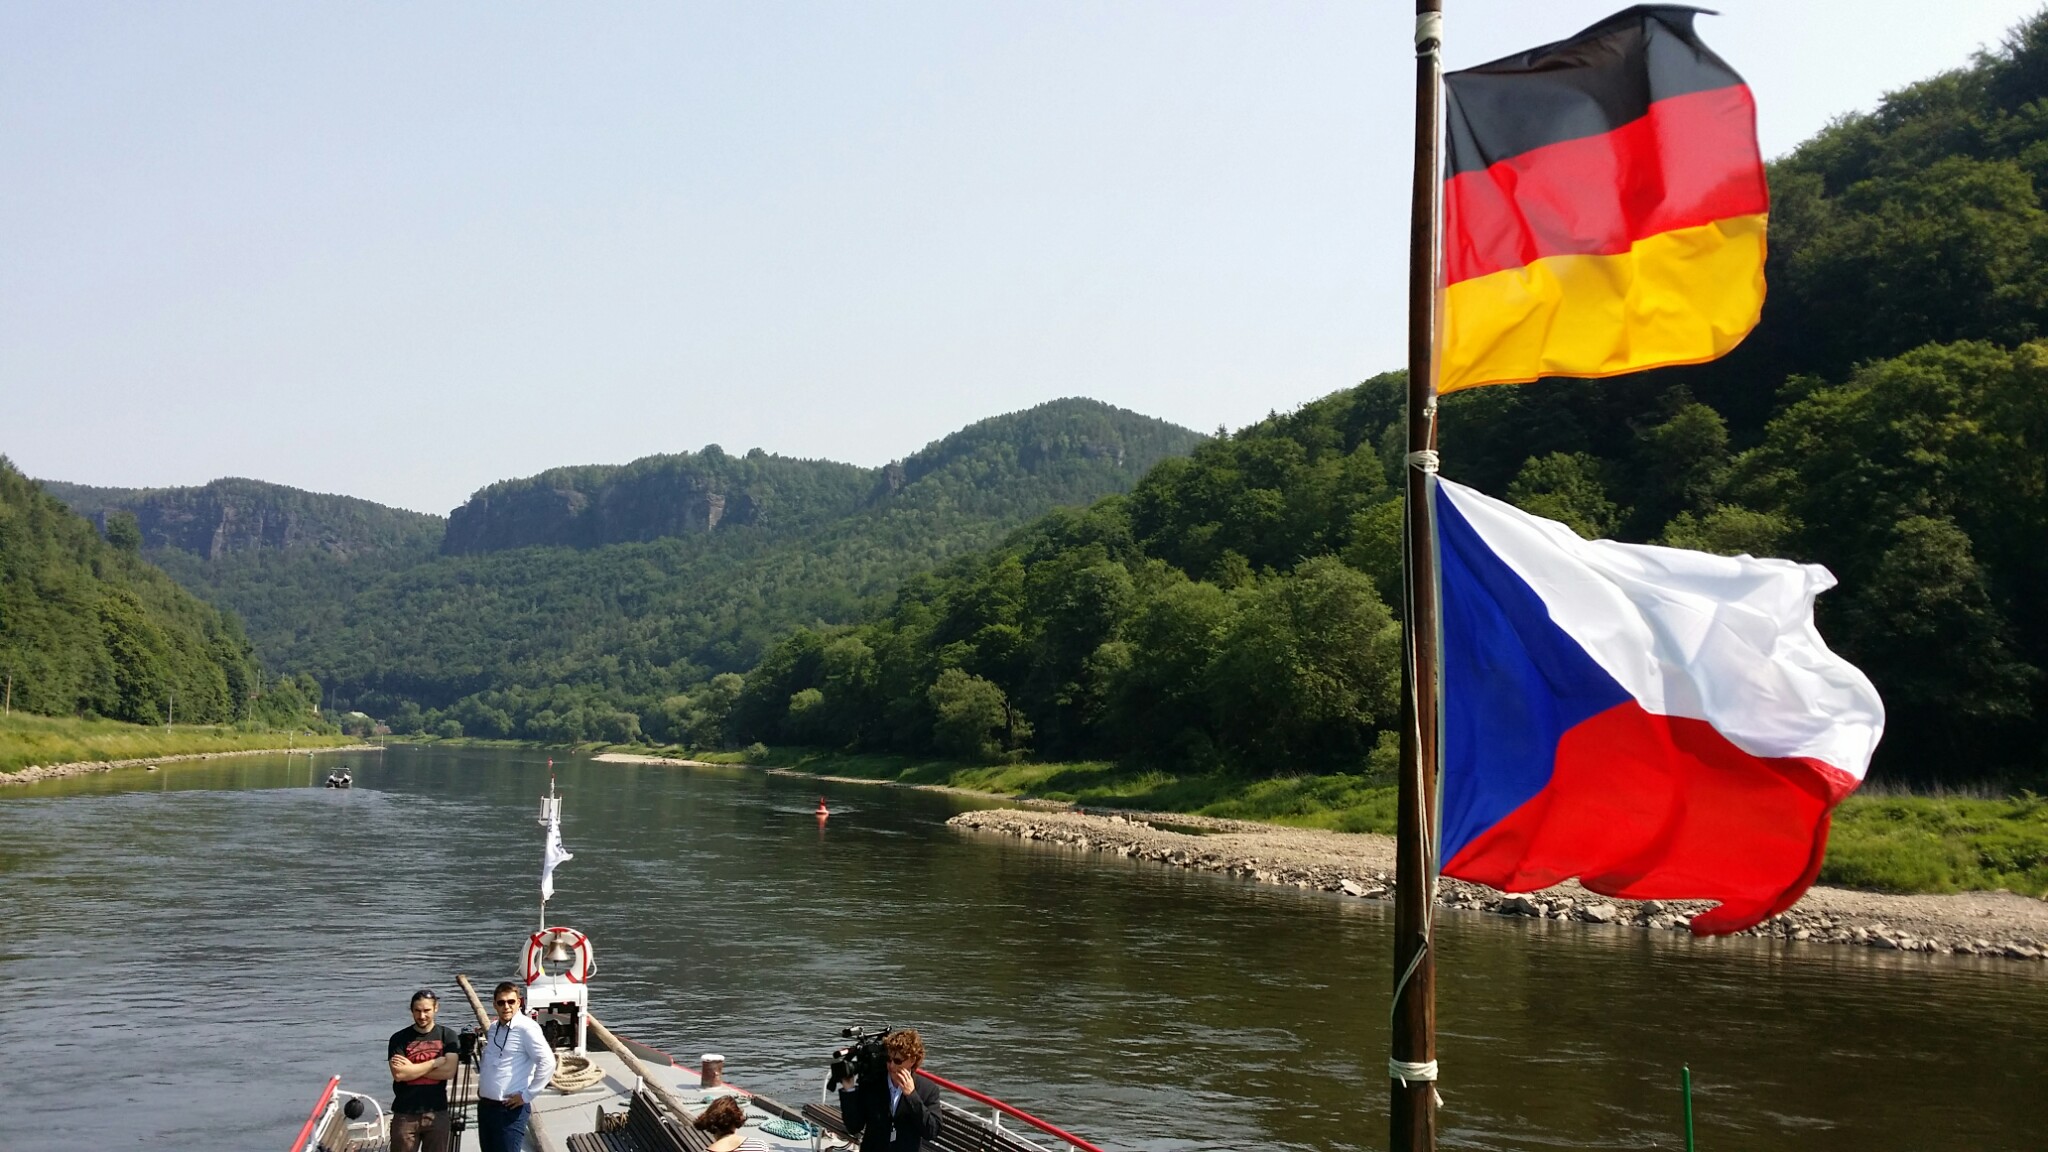 The Czech Republic and Germany signed an agreement on navigability of Elbe River